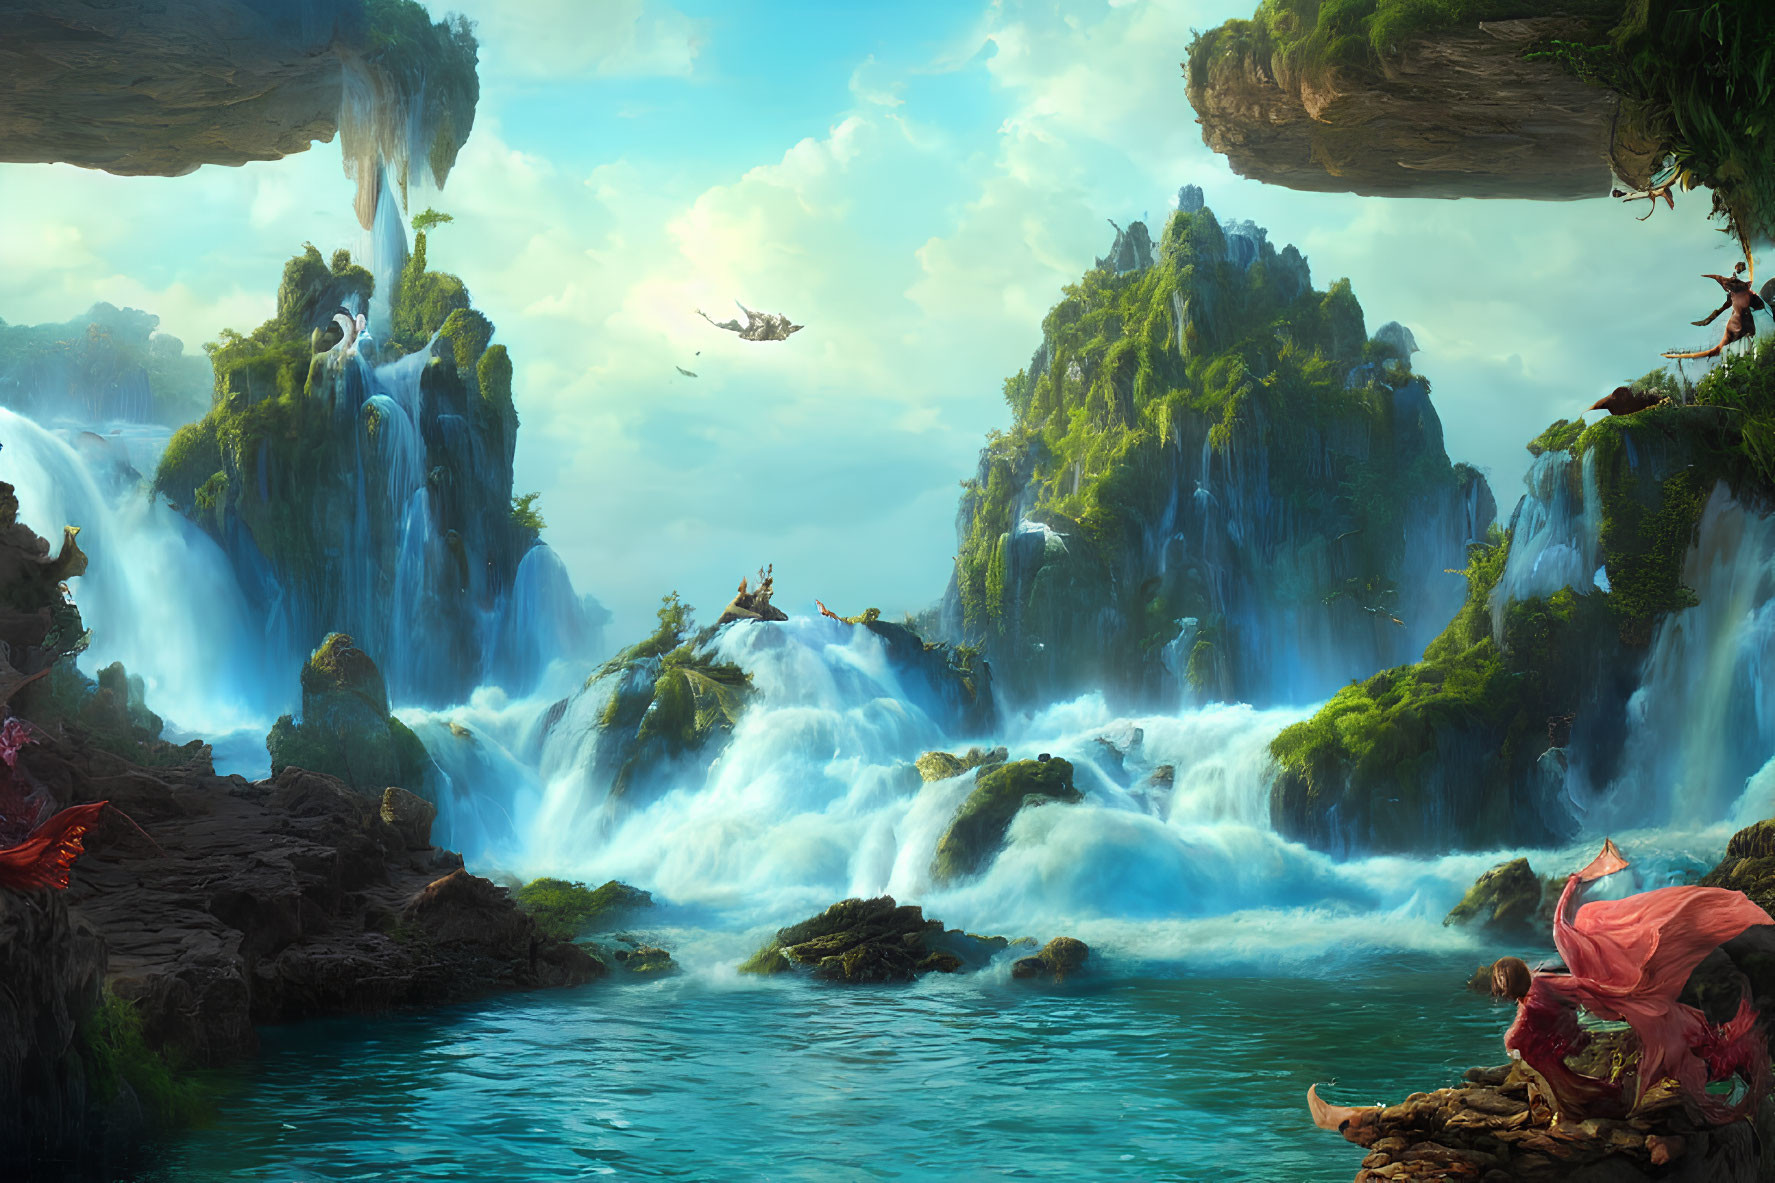 Fantastical landscape with waterfalls, floating islands, dragon, and mystical setting.